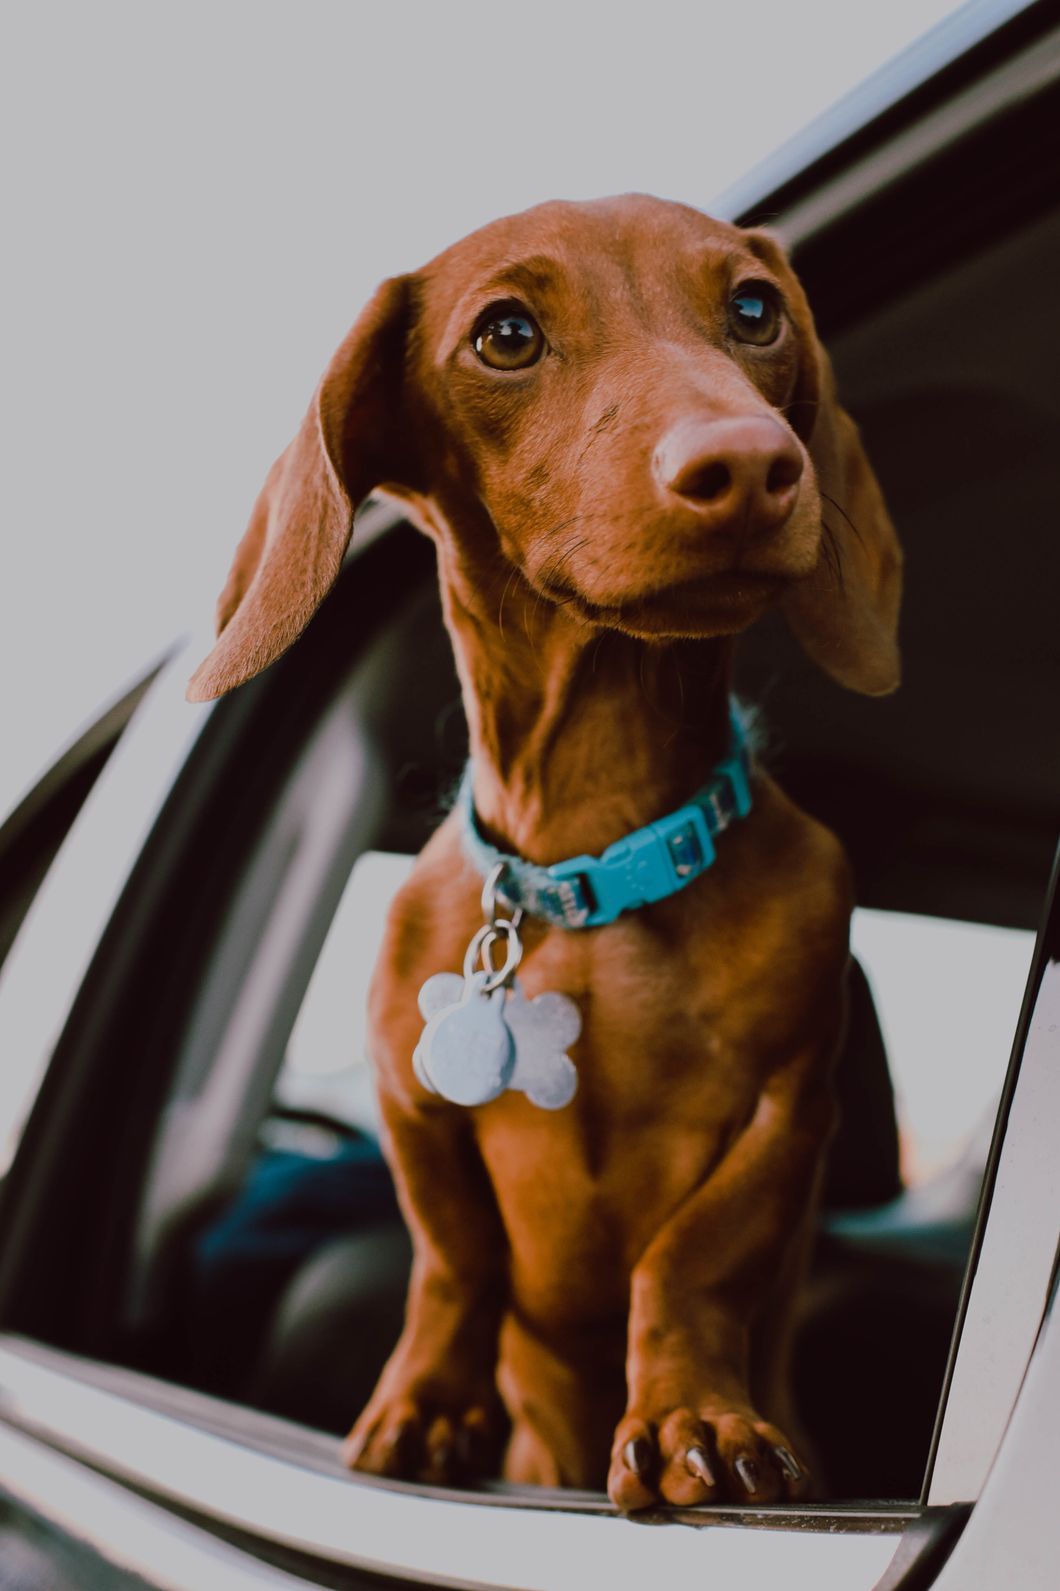 5 Reasons Why Everyone Should Love Dachshunds